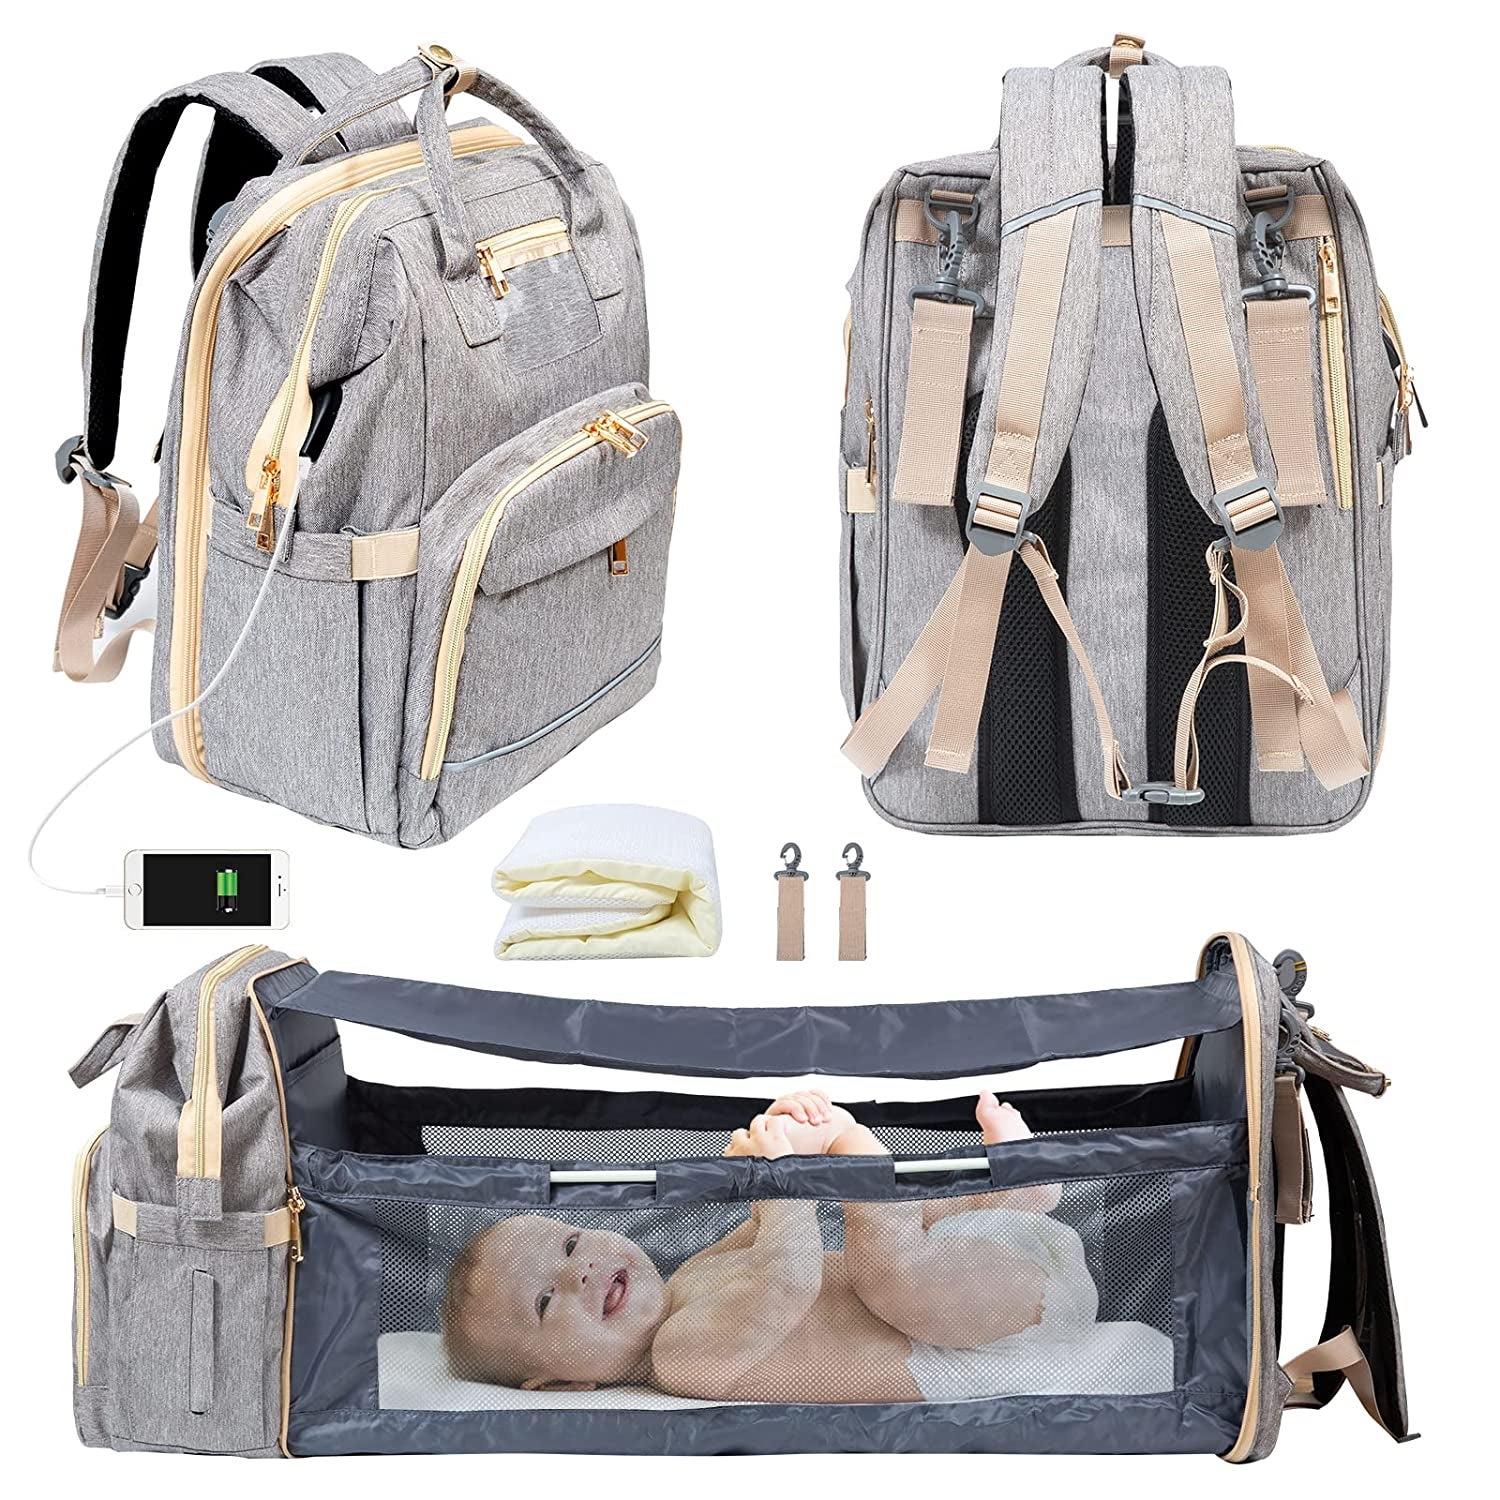 the diaper bag that shows a child inside the changing bed with canopy